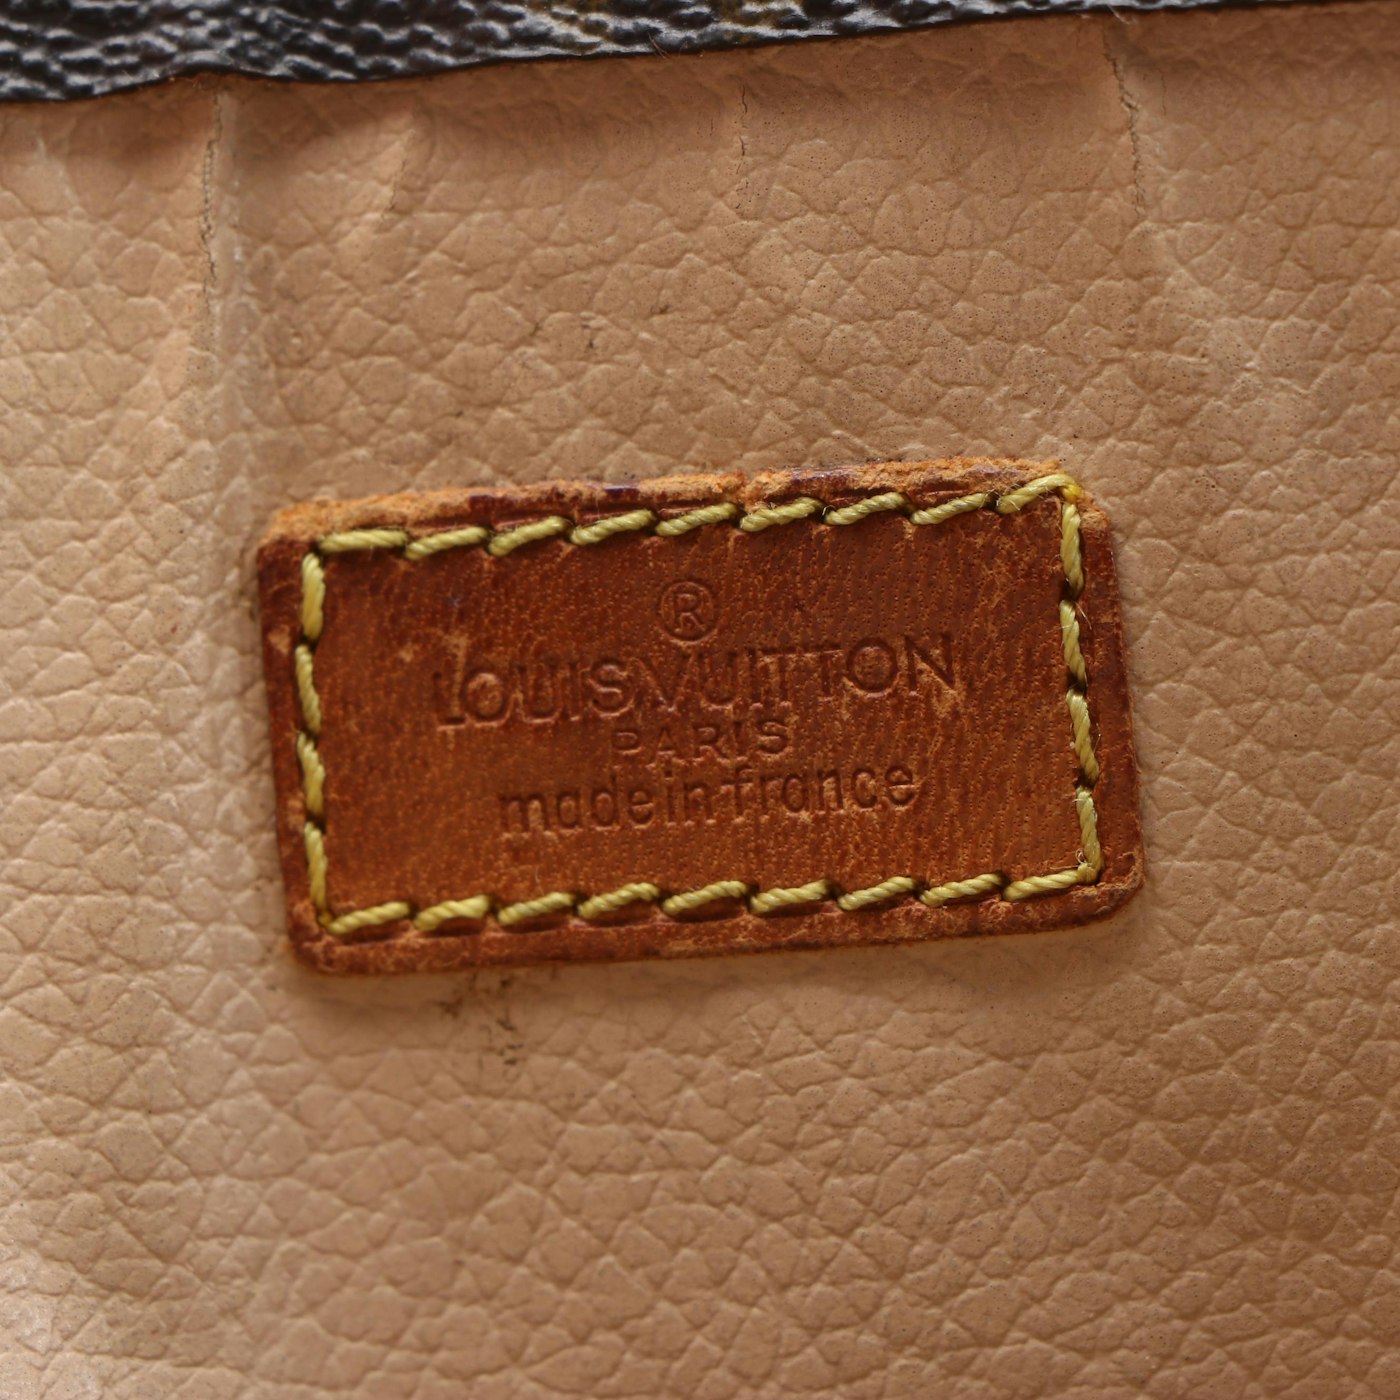 Refurbished Louis Vuitton Sac Plat in Monogram Canvas and Leather, 1988 Vintage | EBTH